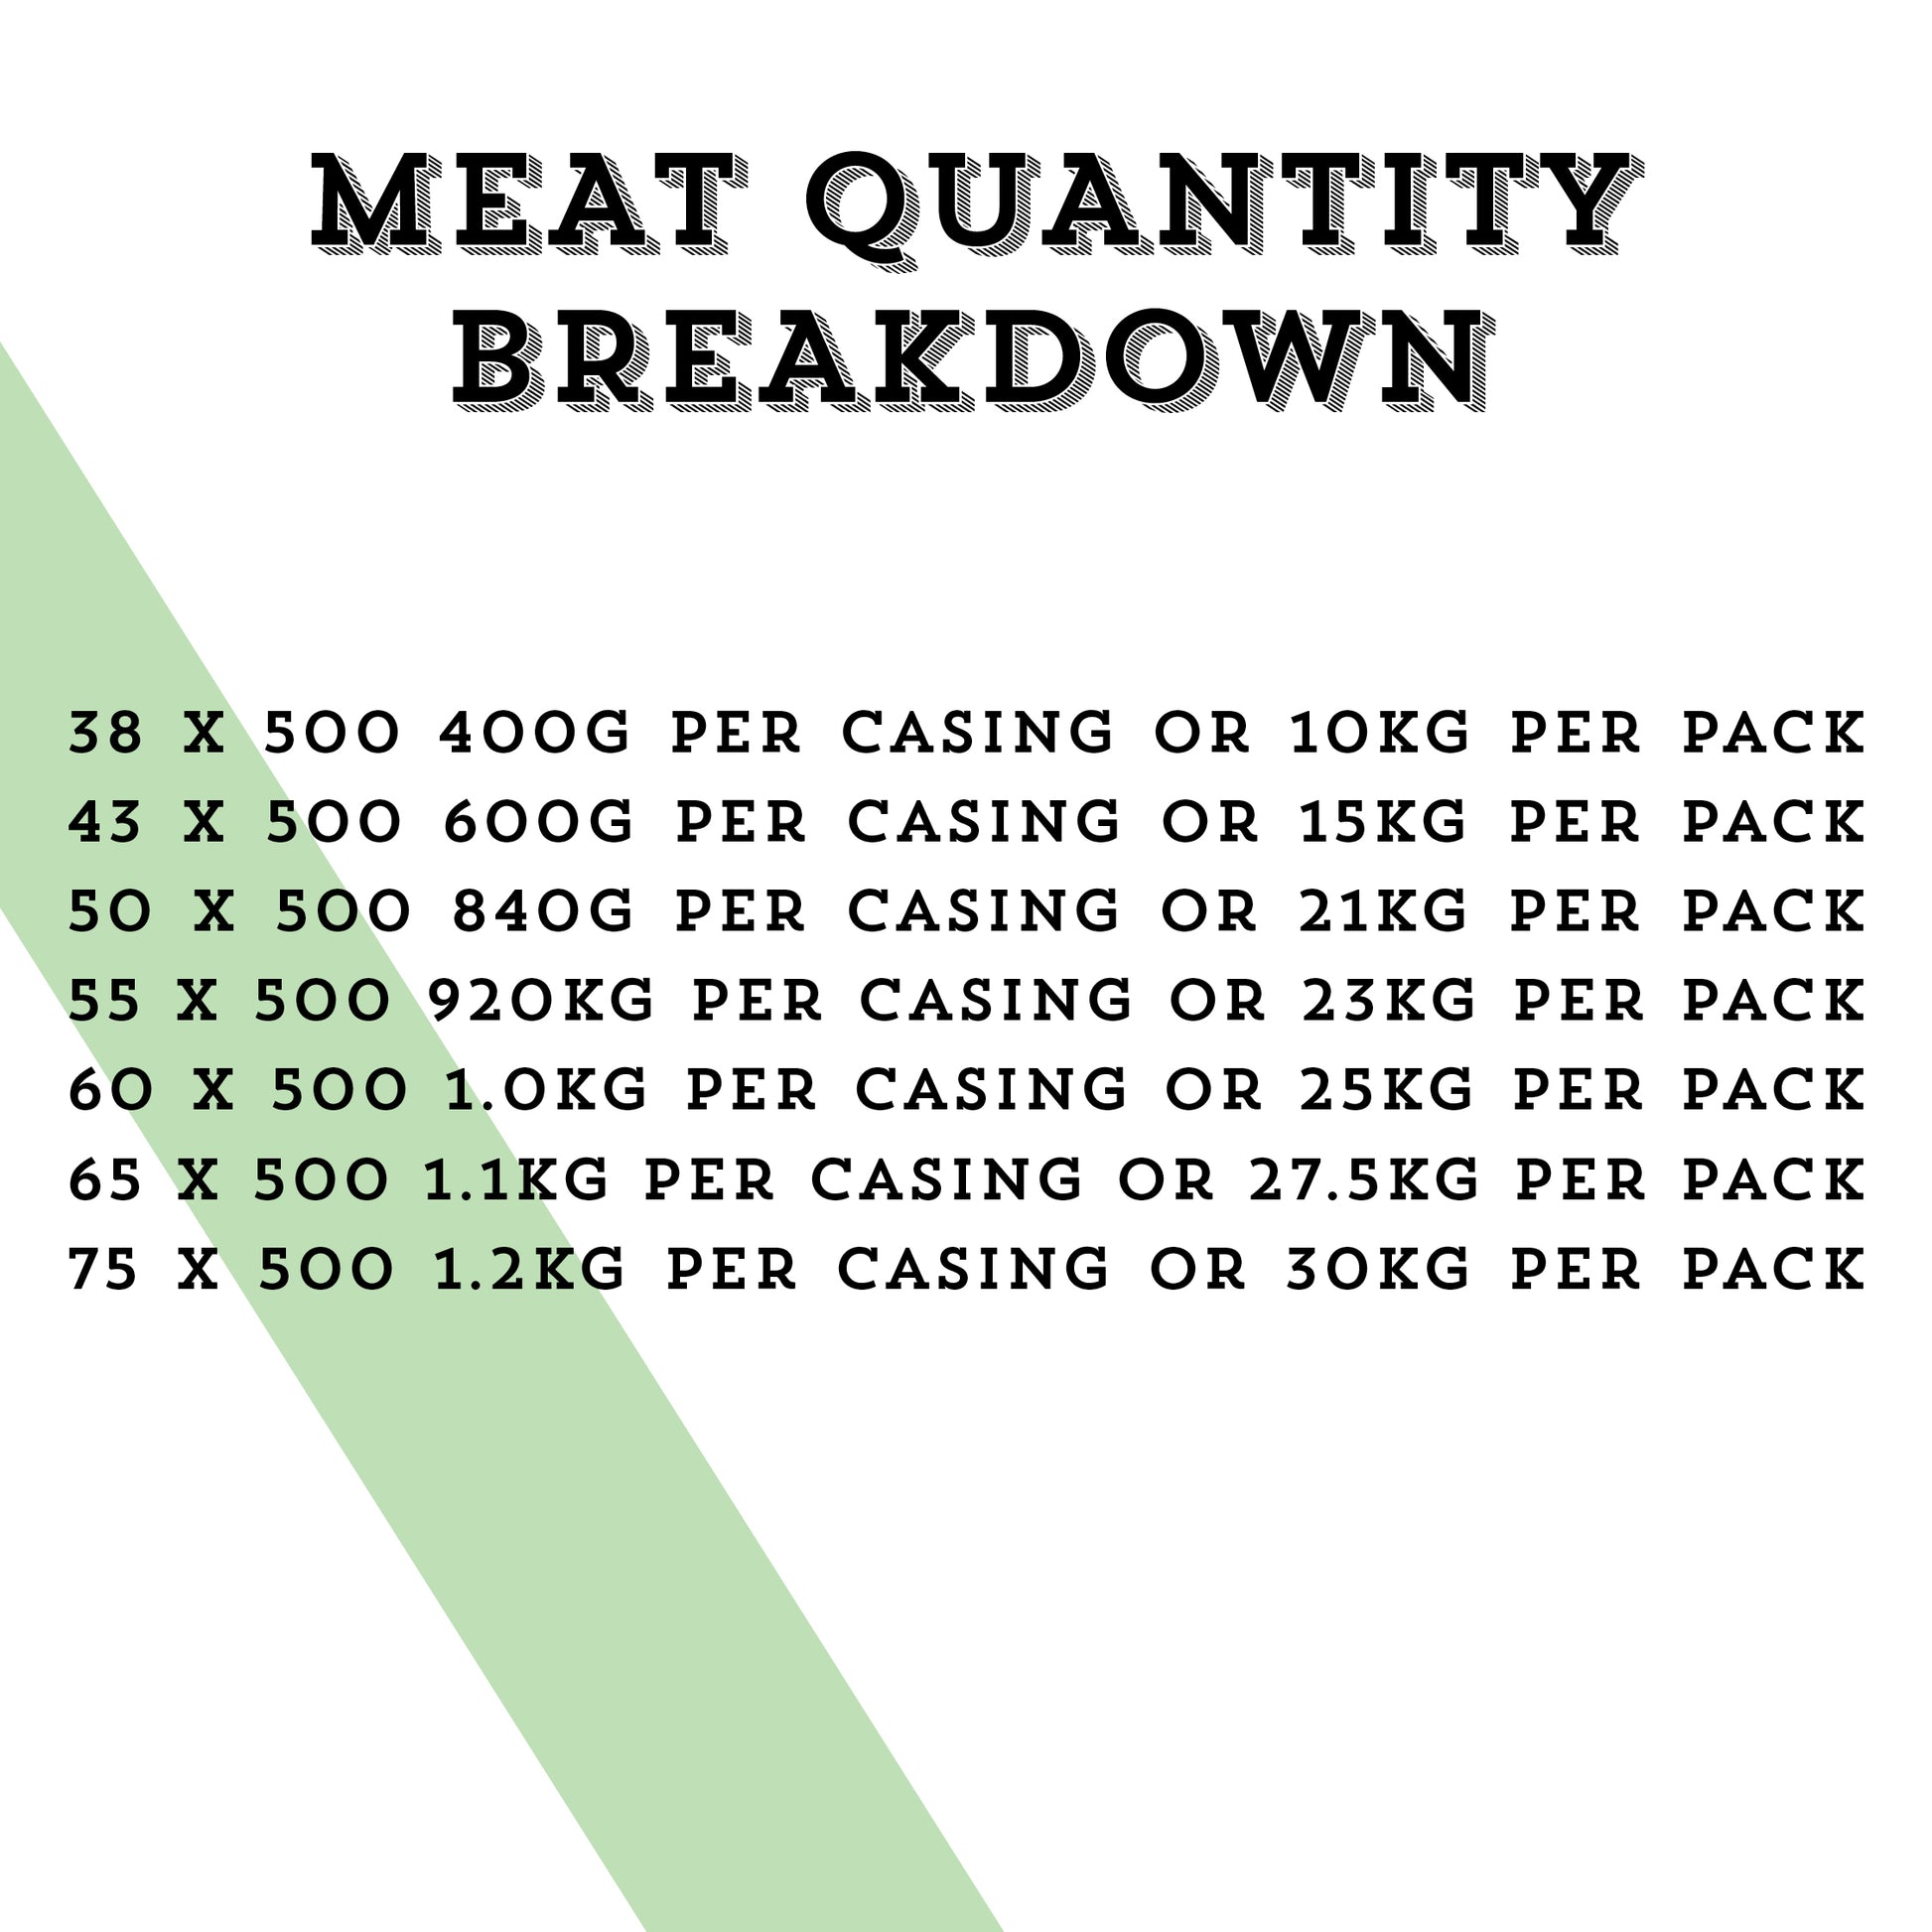 Graphic advising how many kilograms of meat per collagen casing